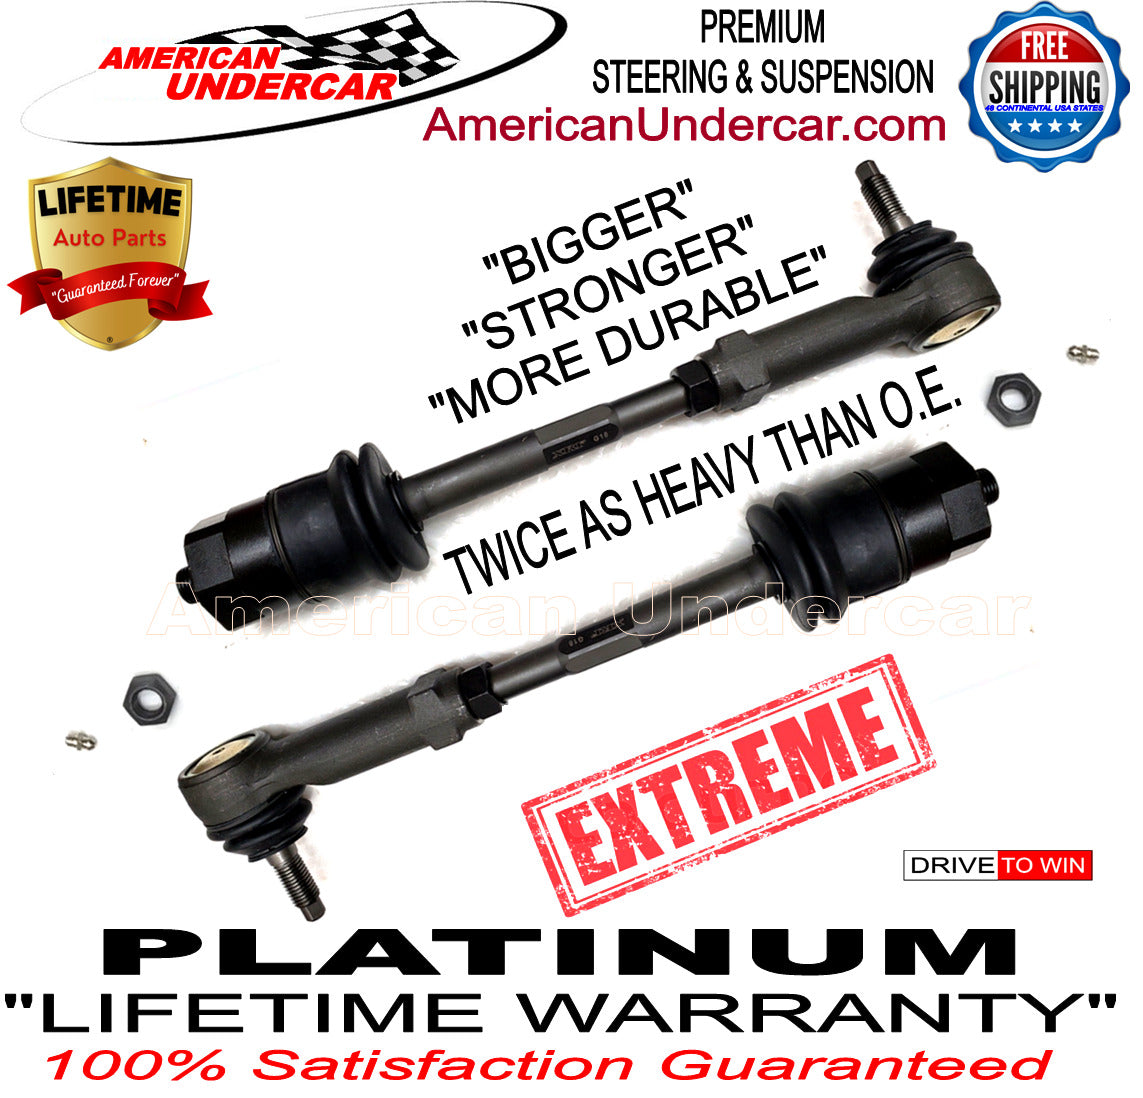 Lifetime EXTREME DUTY Tie Rod End Combo Kit for 2001-2010 Chevrolet, GMC, 1500HD, 2500HD, 3500HD 2WD, 4x4